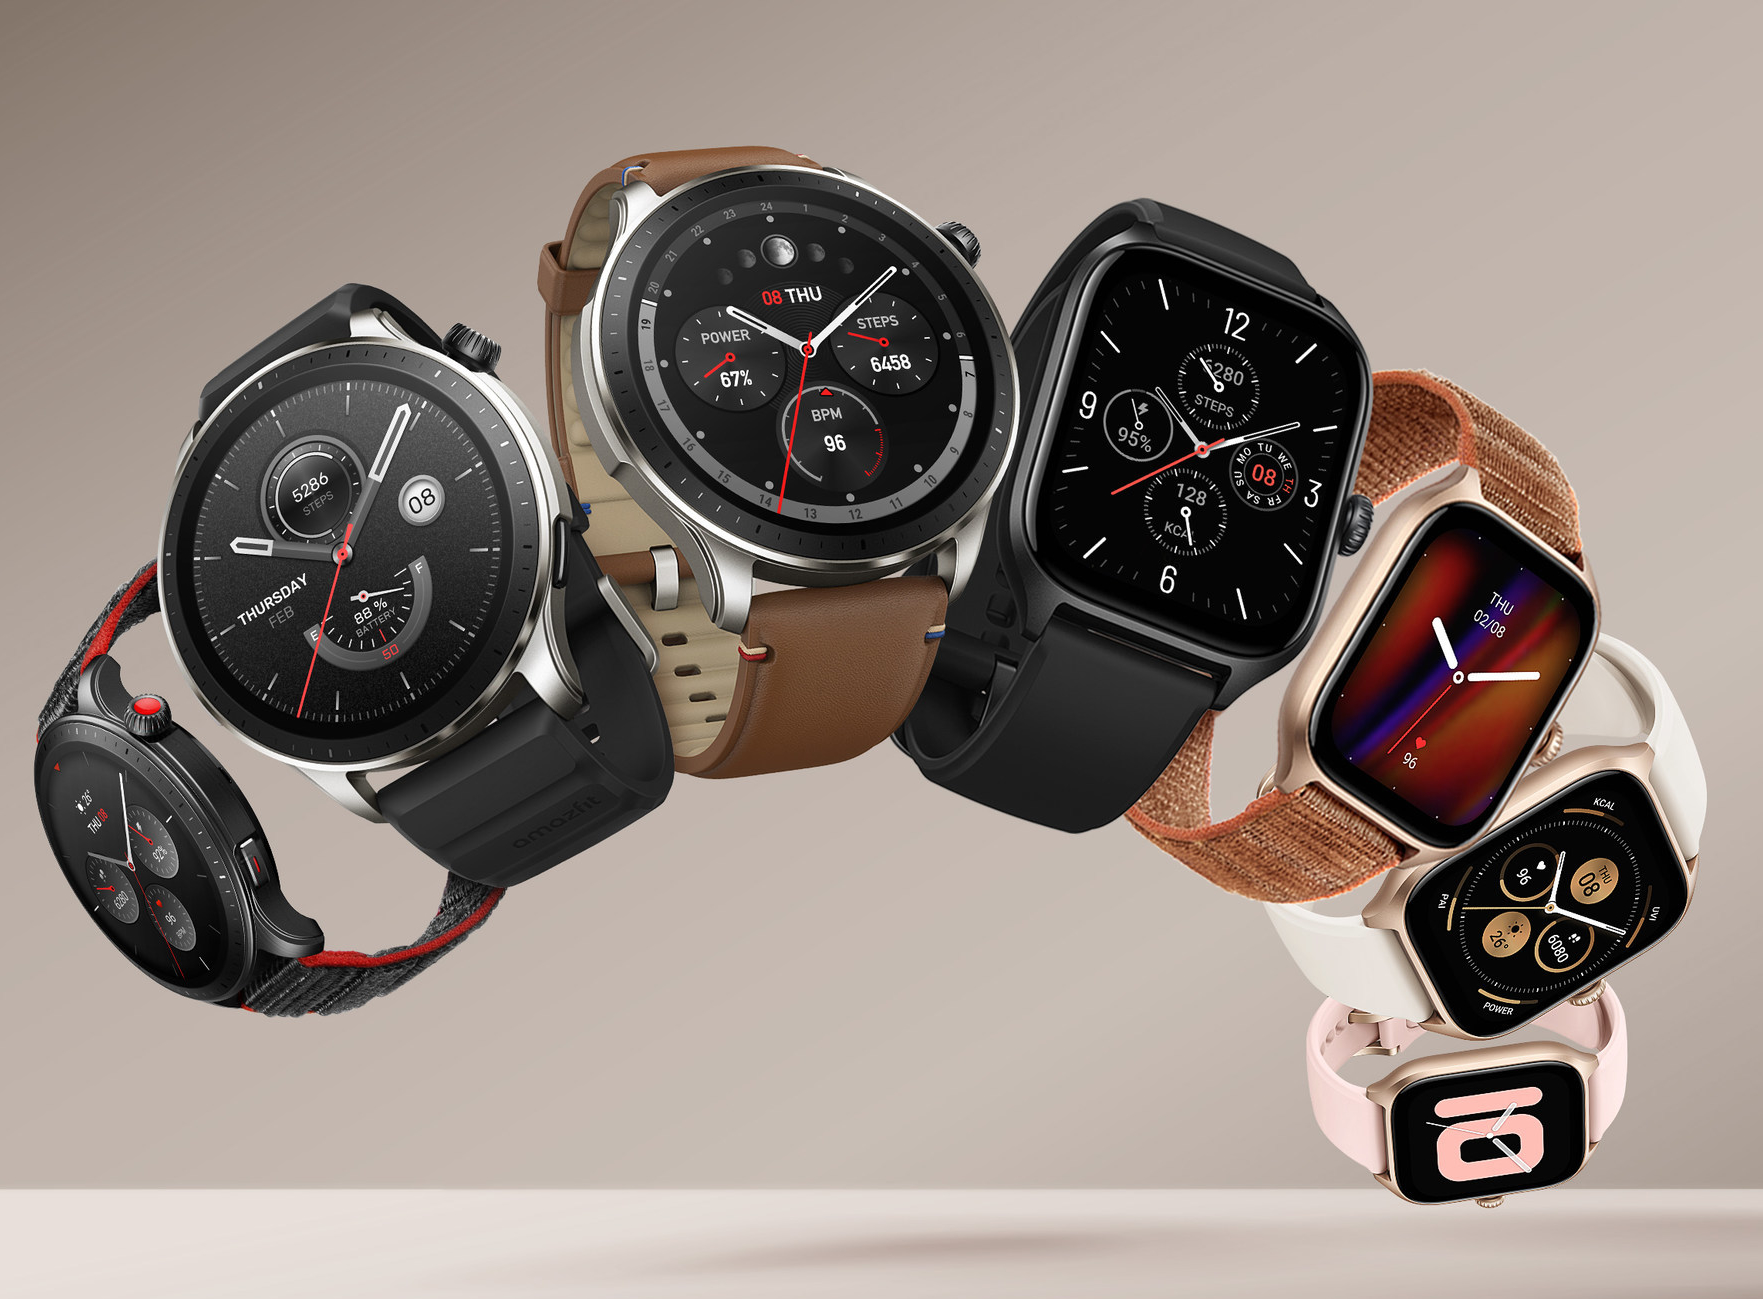 Amazfit GTS 4 Mini vs Huawei Watch GT 2 Pro ECG: What is the